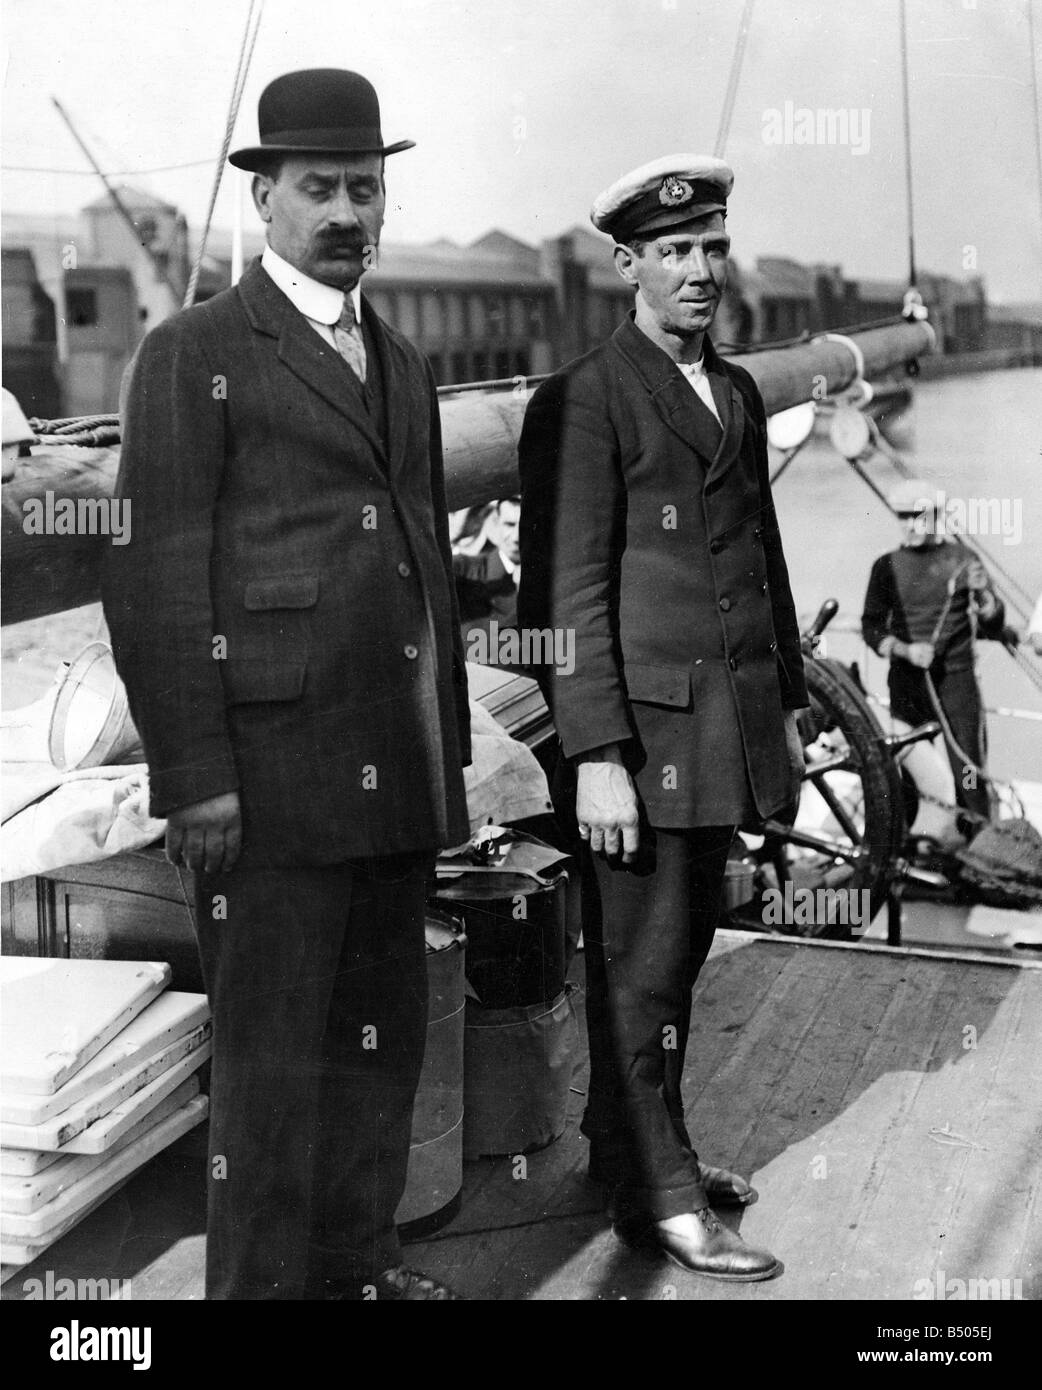 Alfred Cheetham (right) third officer on the Endurance seen here on deck as the ship departs UK shores in August 1914 Cheetham served under Scott on the 'Morning' ( relief of the 'Discovery') , and the 'Terra Nova'. And under Shackleton on 'Nimrod ', where he was third officer and boatswain, and of course the 'Endurance' as 3rd Officer in charge of the fo'c's'le ( forecastle) crew. Cheetham was a significant figure in antarctic exploration in his own right, making four trips to Antarctica. He died whilst serving in the Merchant marine during the First World War. Stock Photo